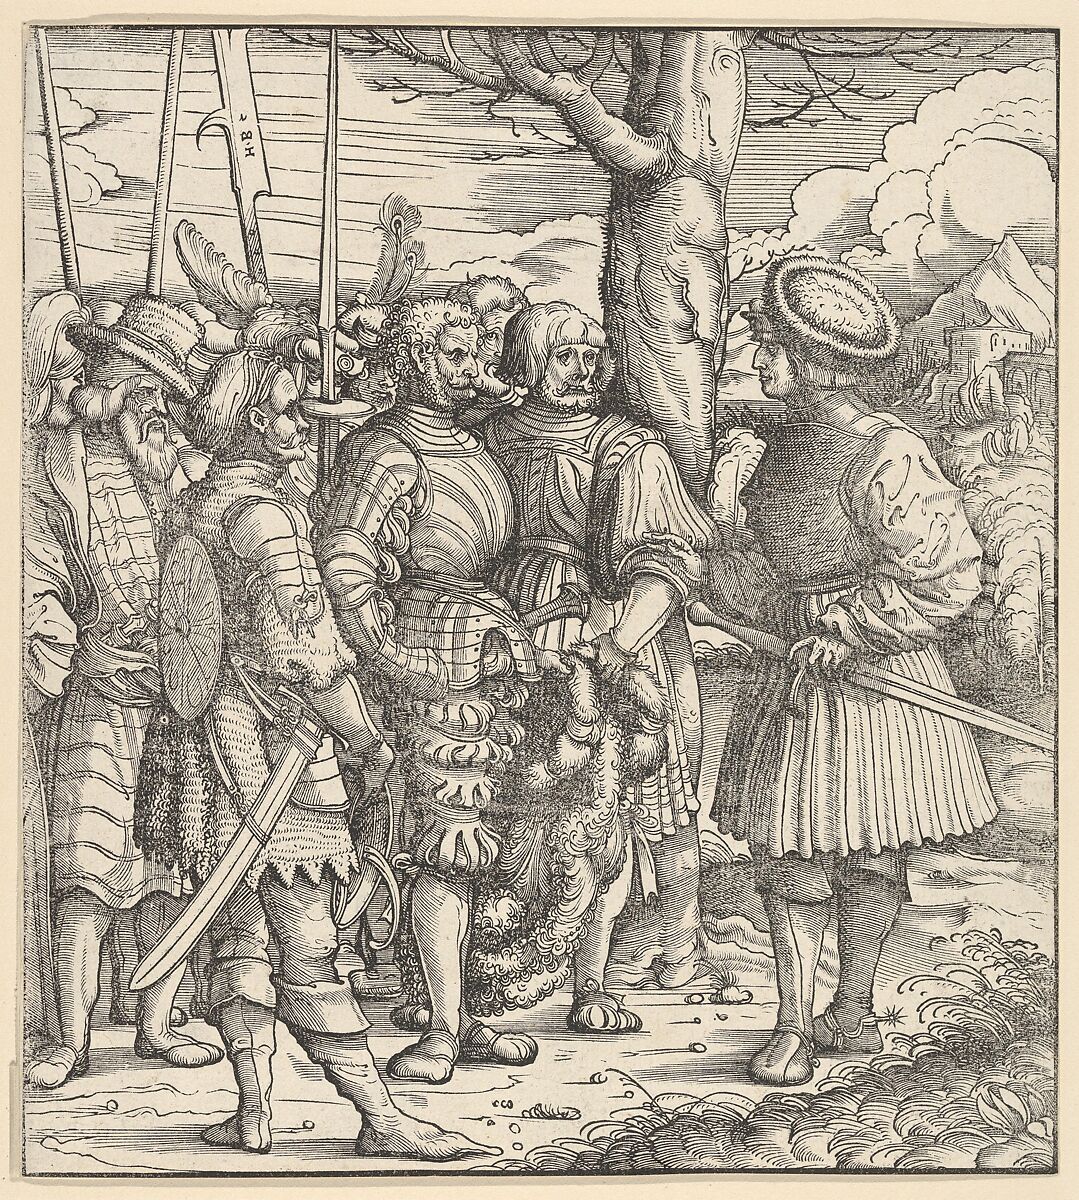 The Skill of the White King Dealing with Different Nations in Wartime, from "Der Weisskunig", Hans Burgkmair (German, Augsburg 1473–1531 Augsburg), Woodcut 